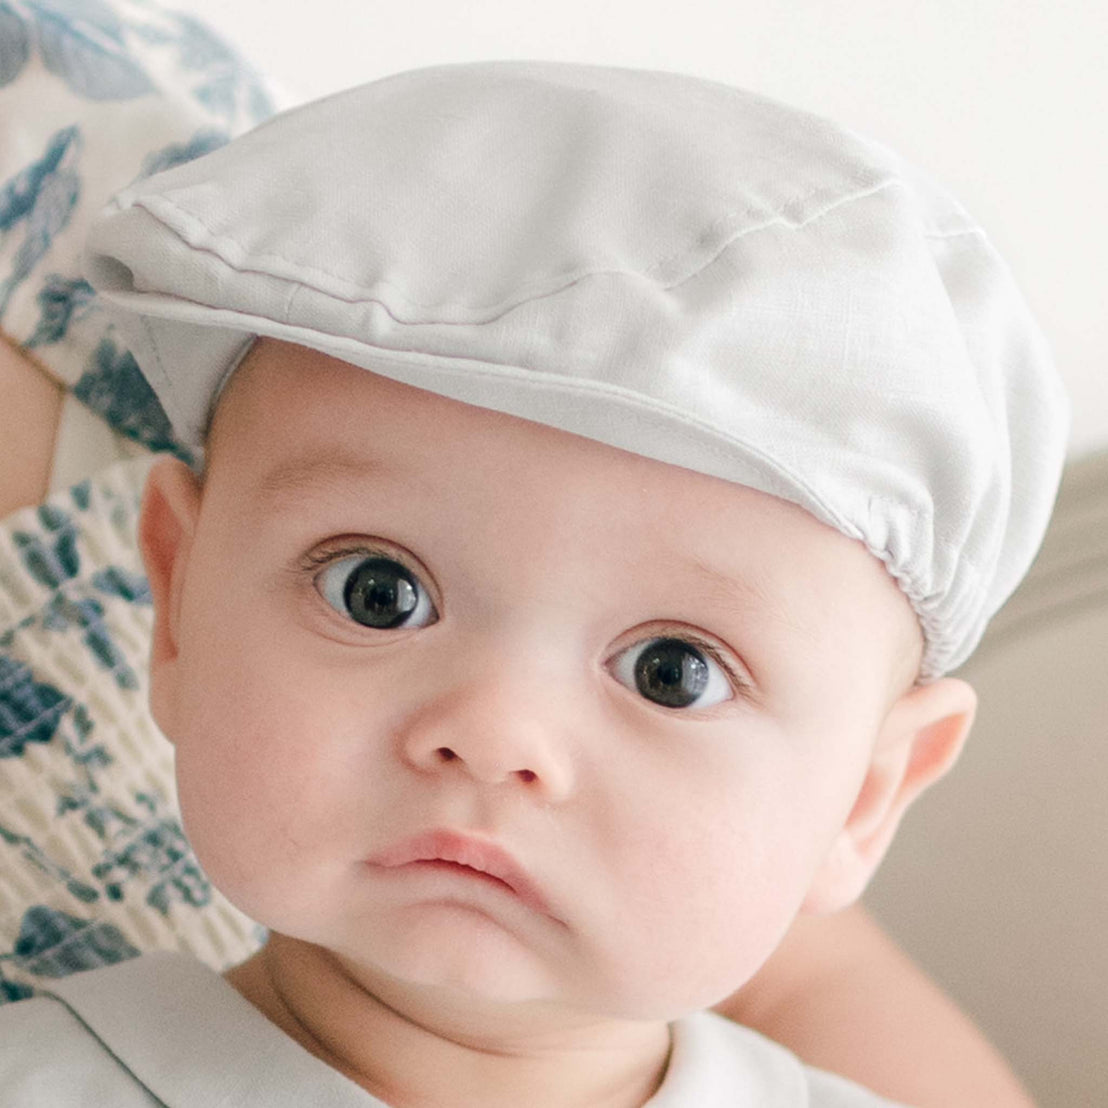 A baby wearing the Grayson Linen Newsboy Cap stares ahead with large, expressive eyes. Dressed in the matching Linen Romper. A partial view of another person is visible in the background. The baby’s expression appears curious and intrigued.